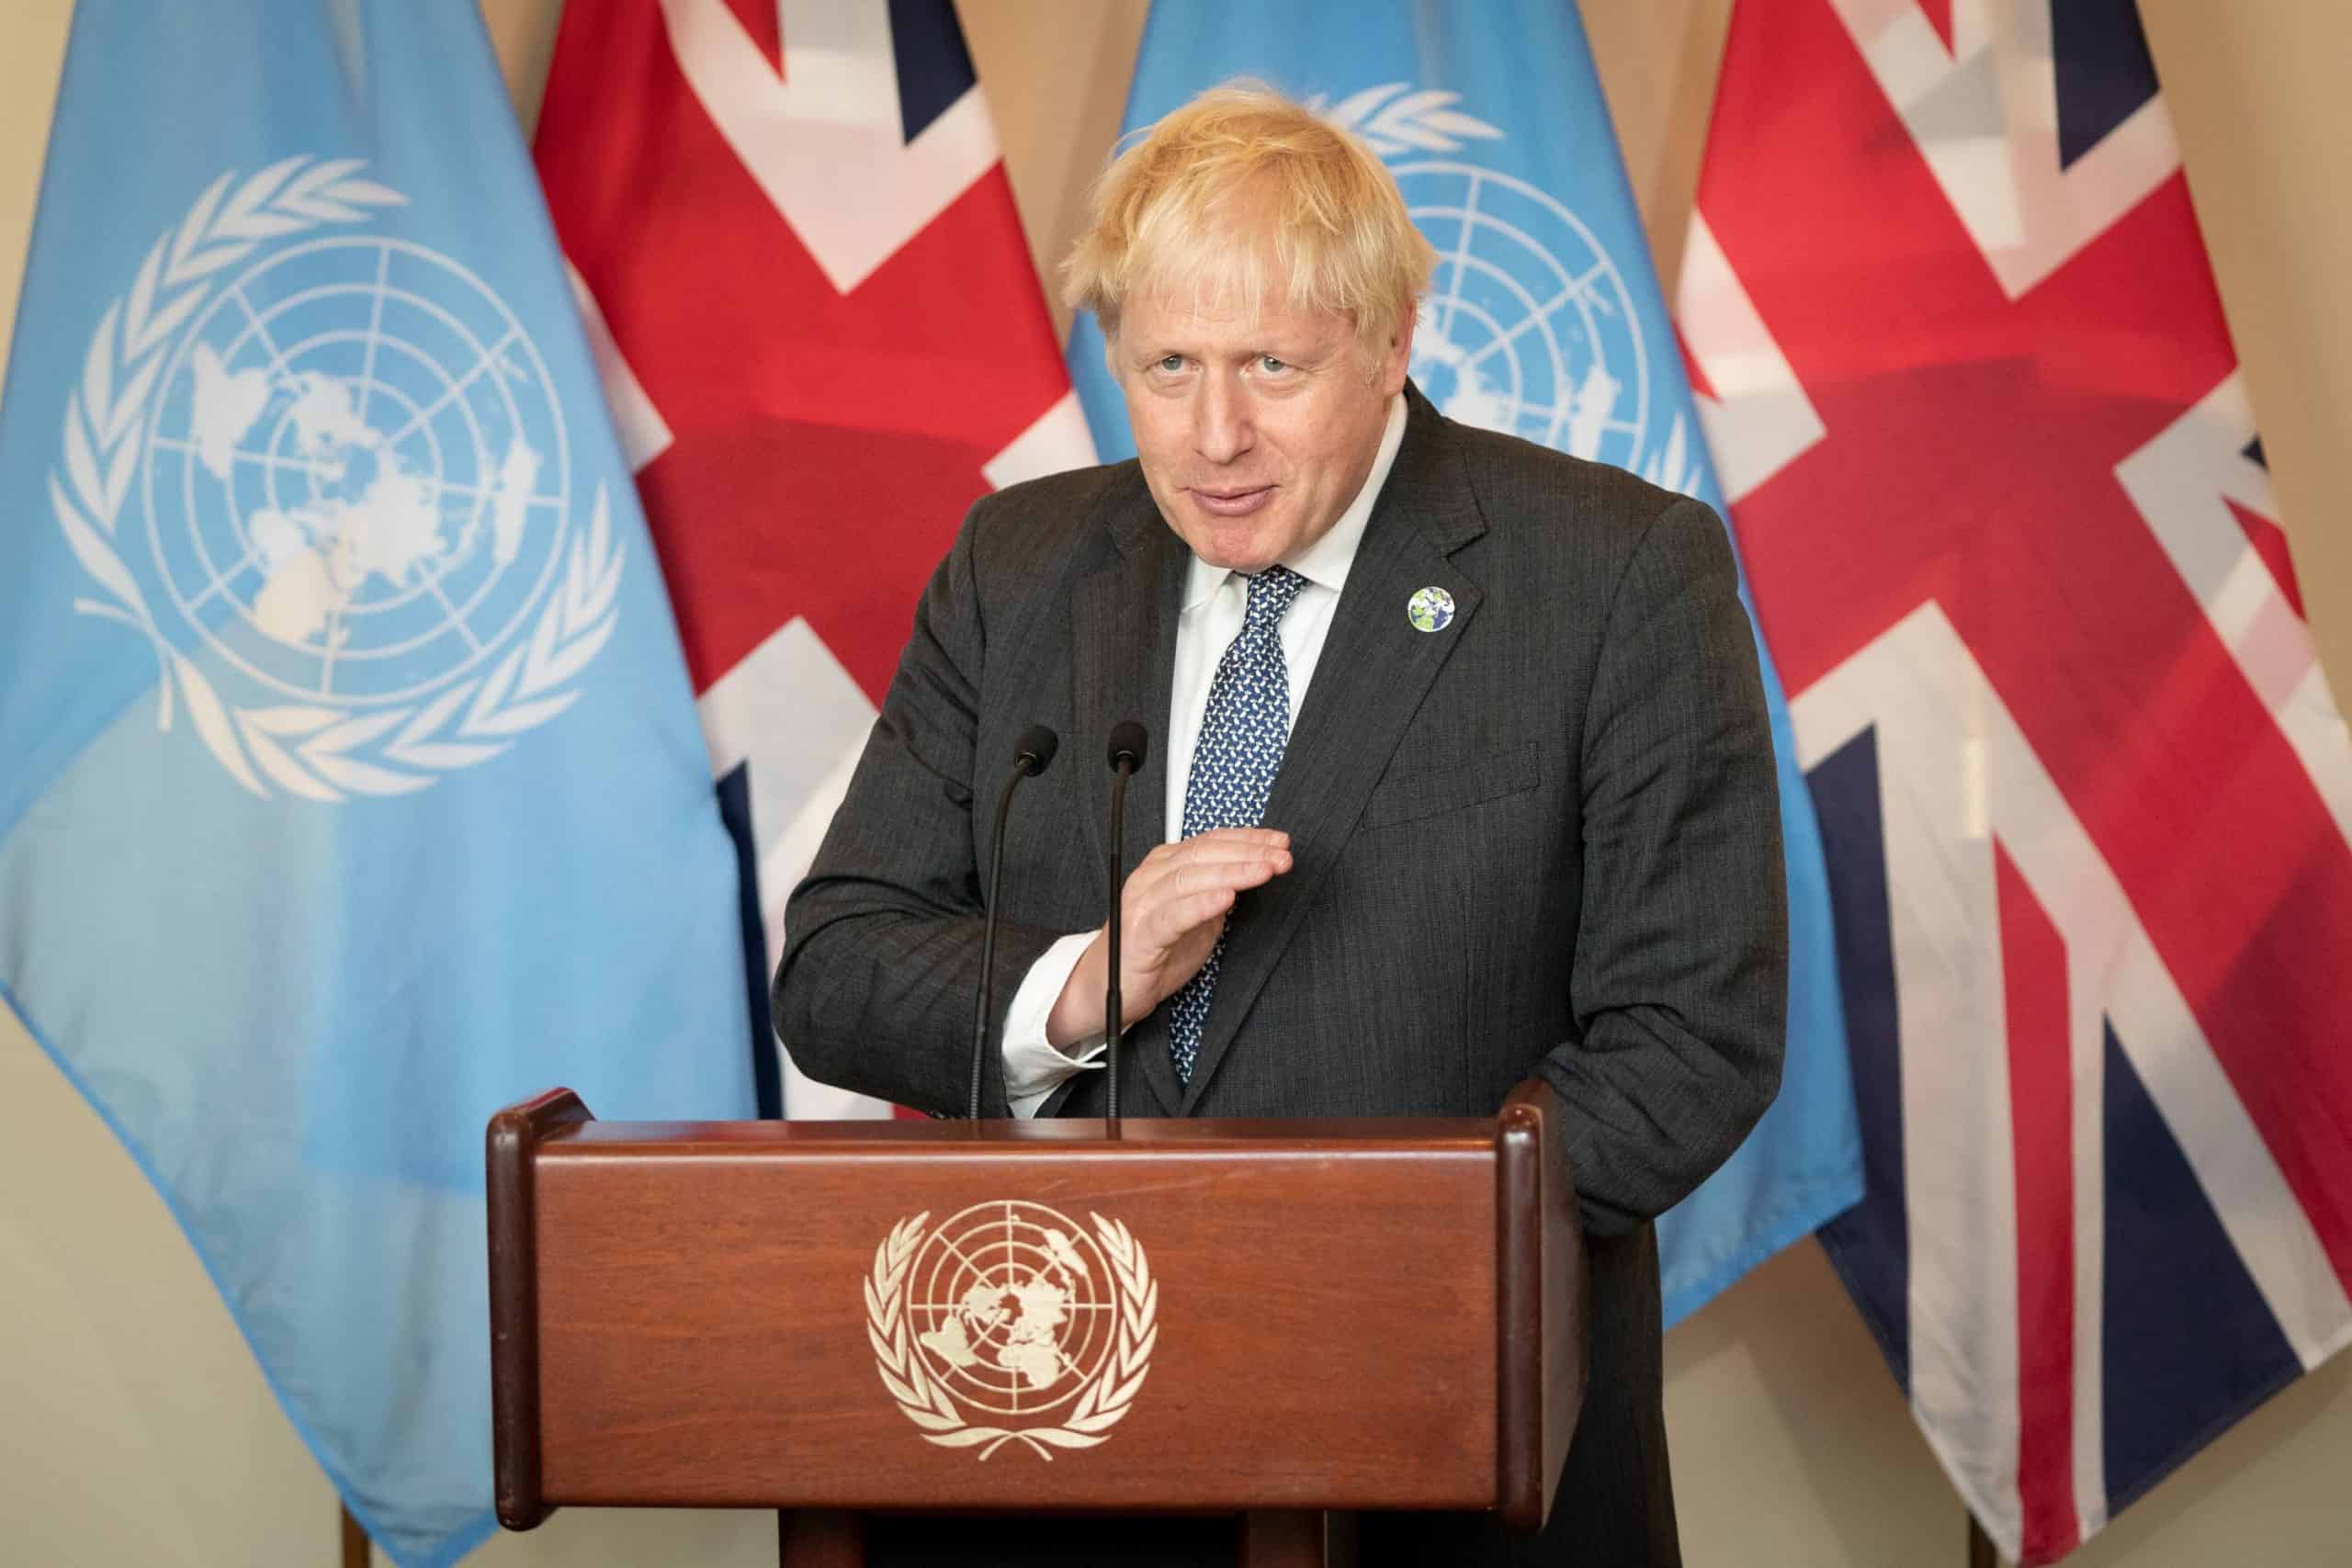 Boris tells UN General Assembly: Kermit the Frog was wrong